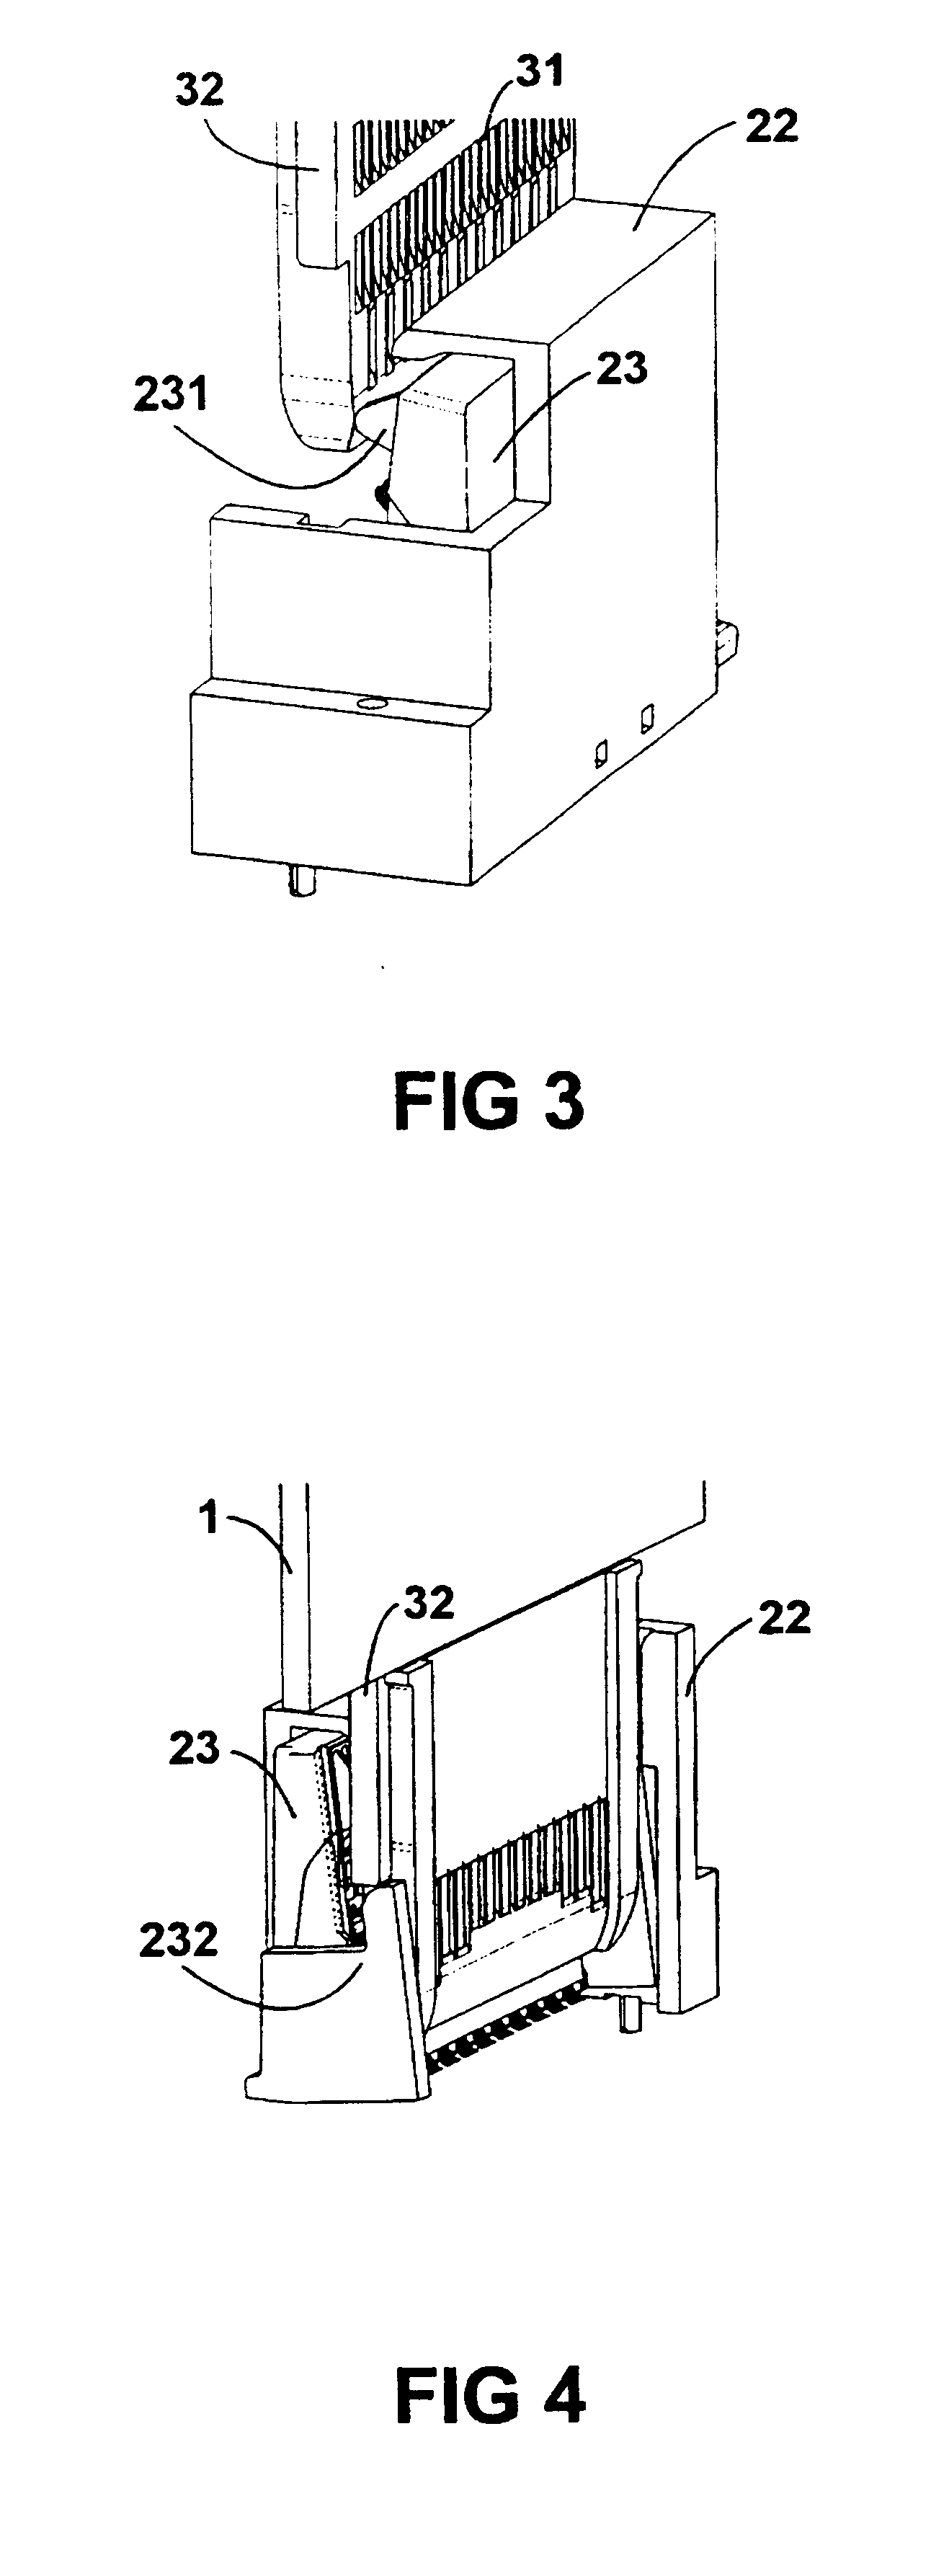 Printed circuit board and connector assembly